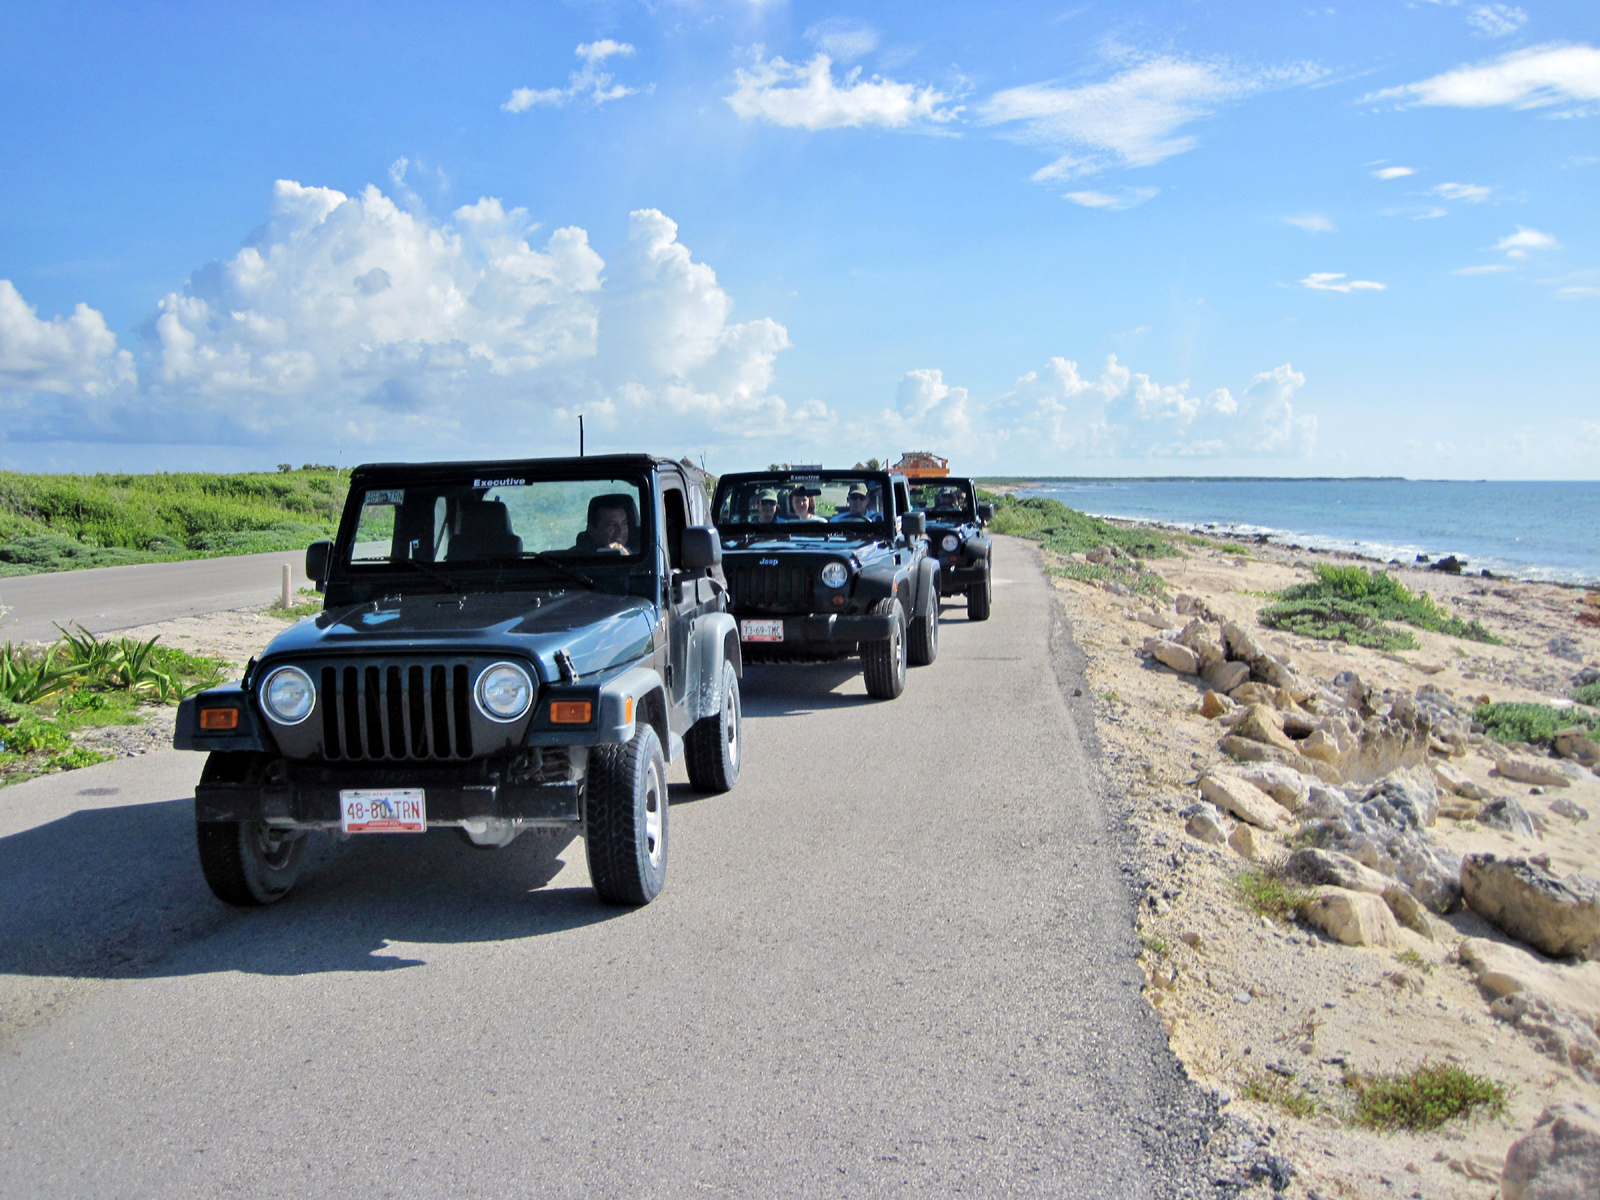 Cozumel Adventure by jeep